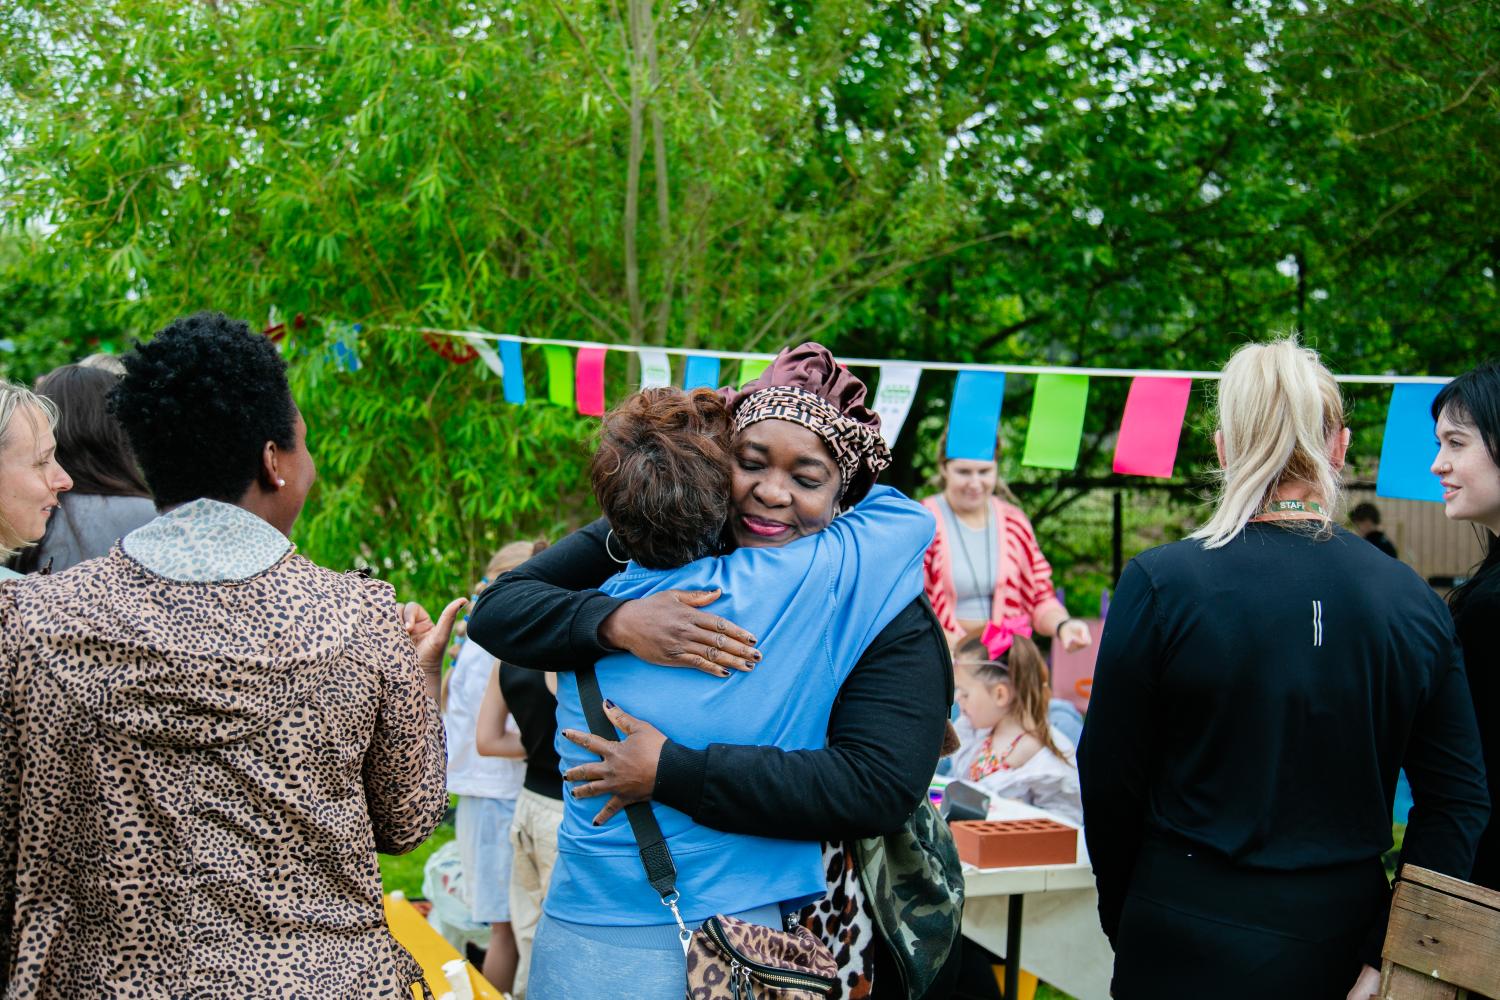 Two woman exchange a tender hug at an event. Lots of trees and bunting are visible in the background.